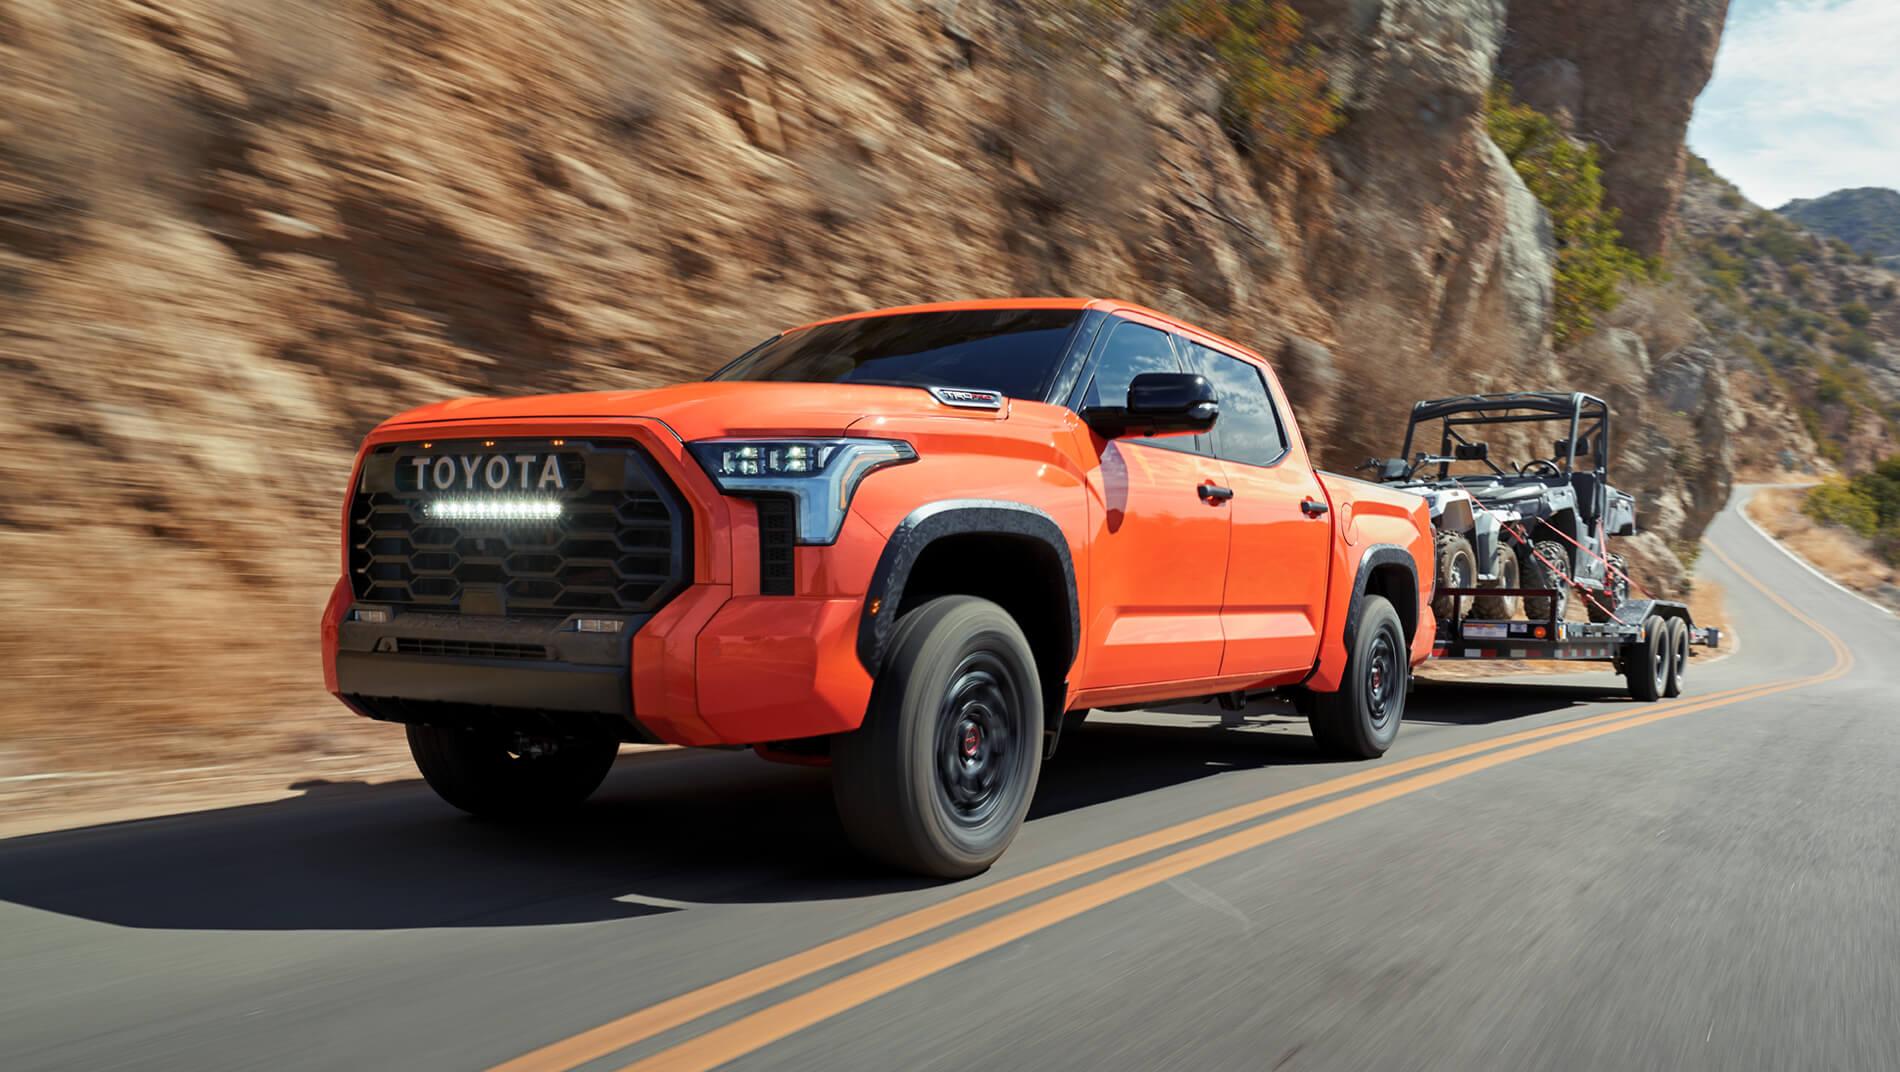 Orange Toyota Tundra pulling trailer with toys up a mountain road